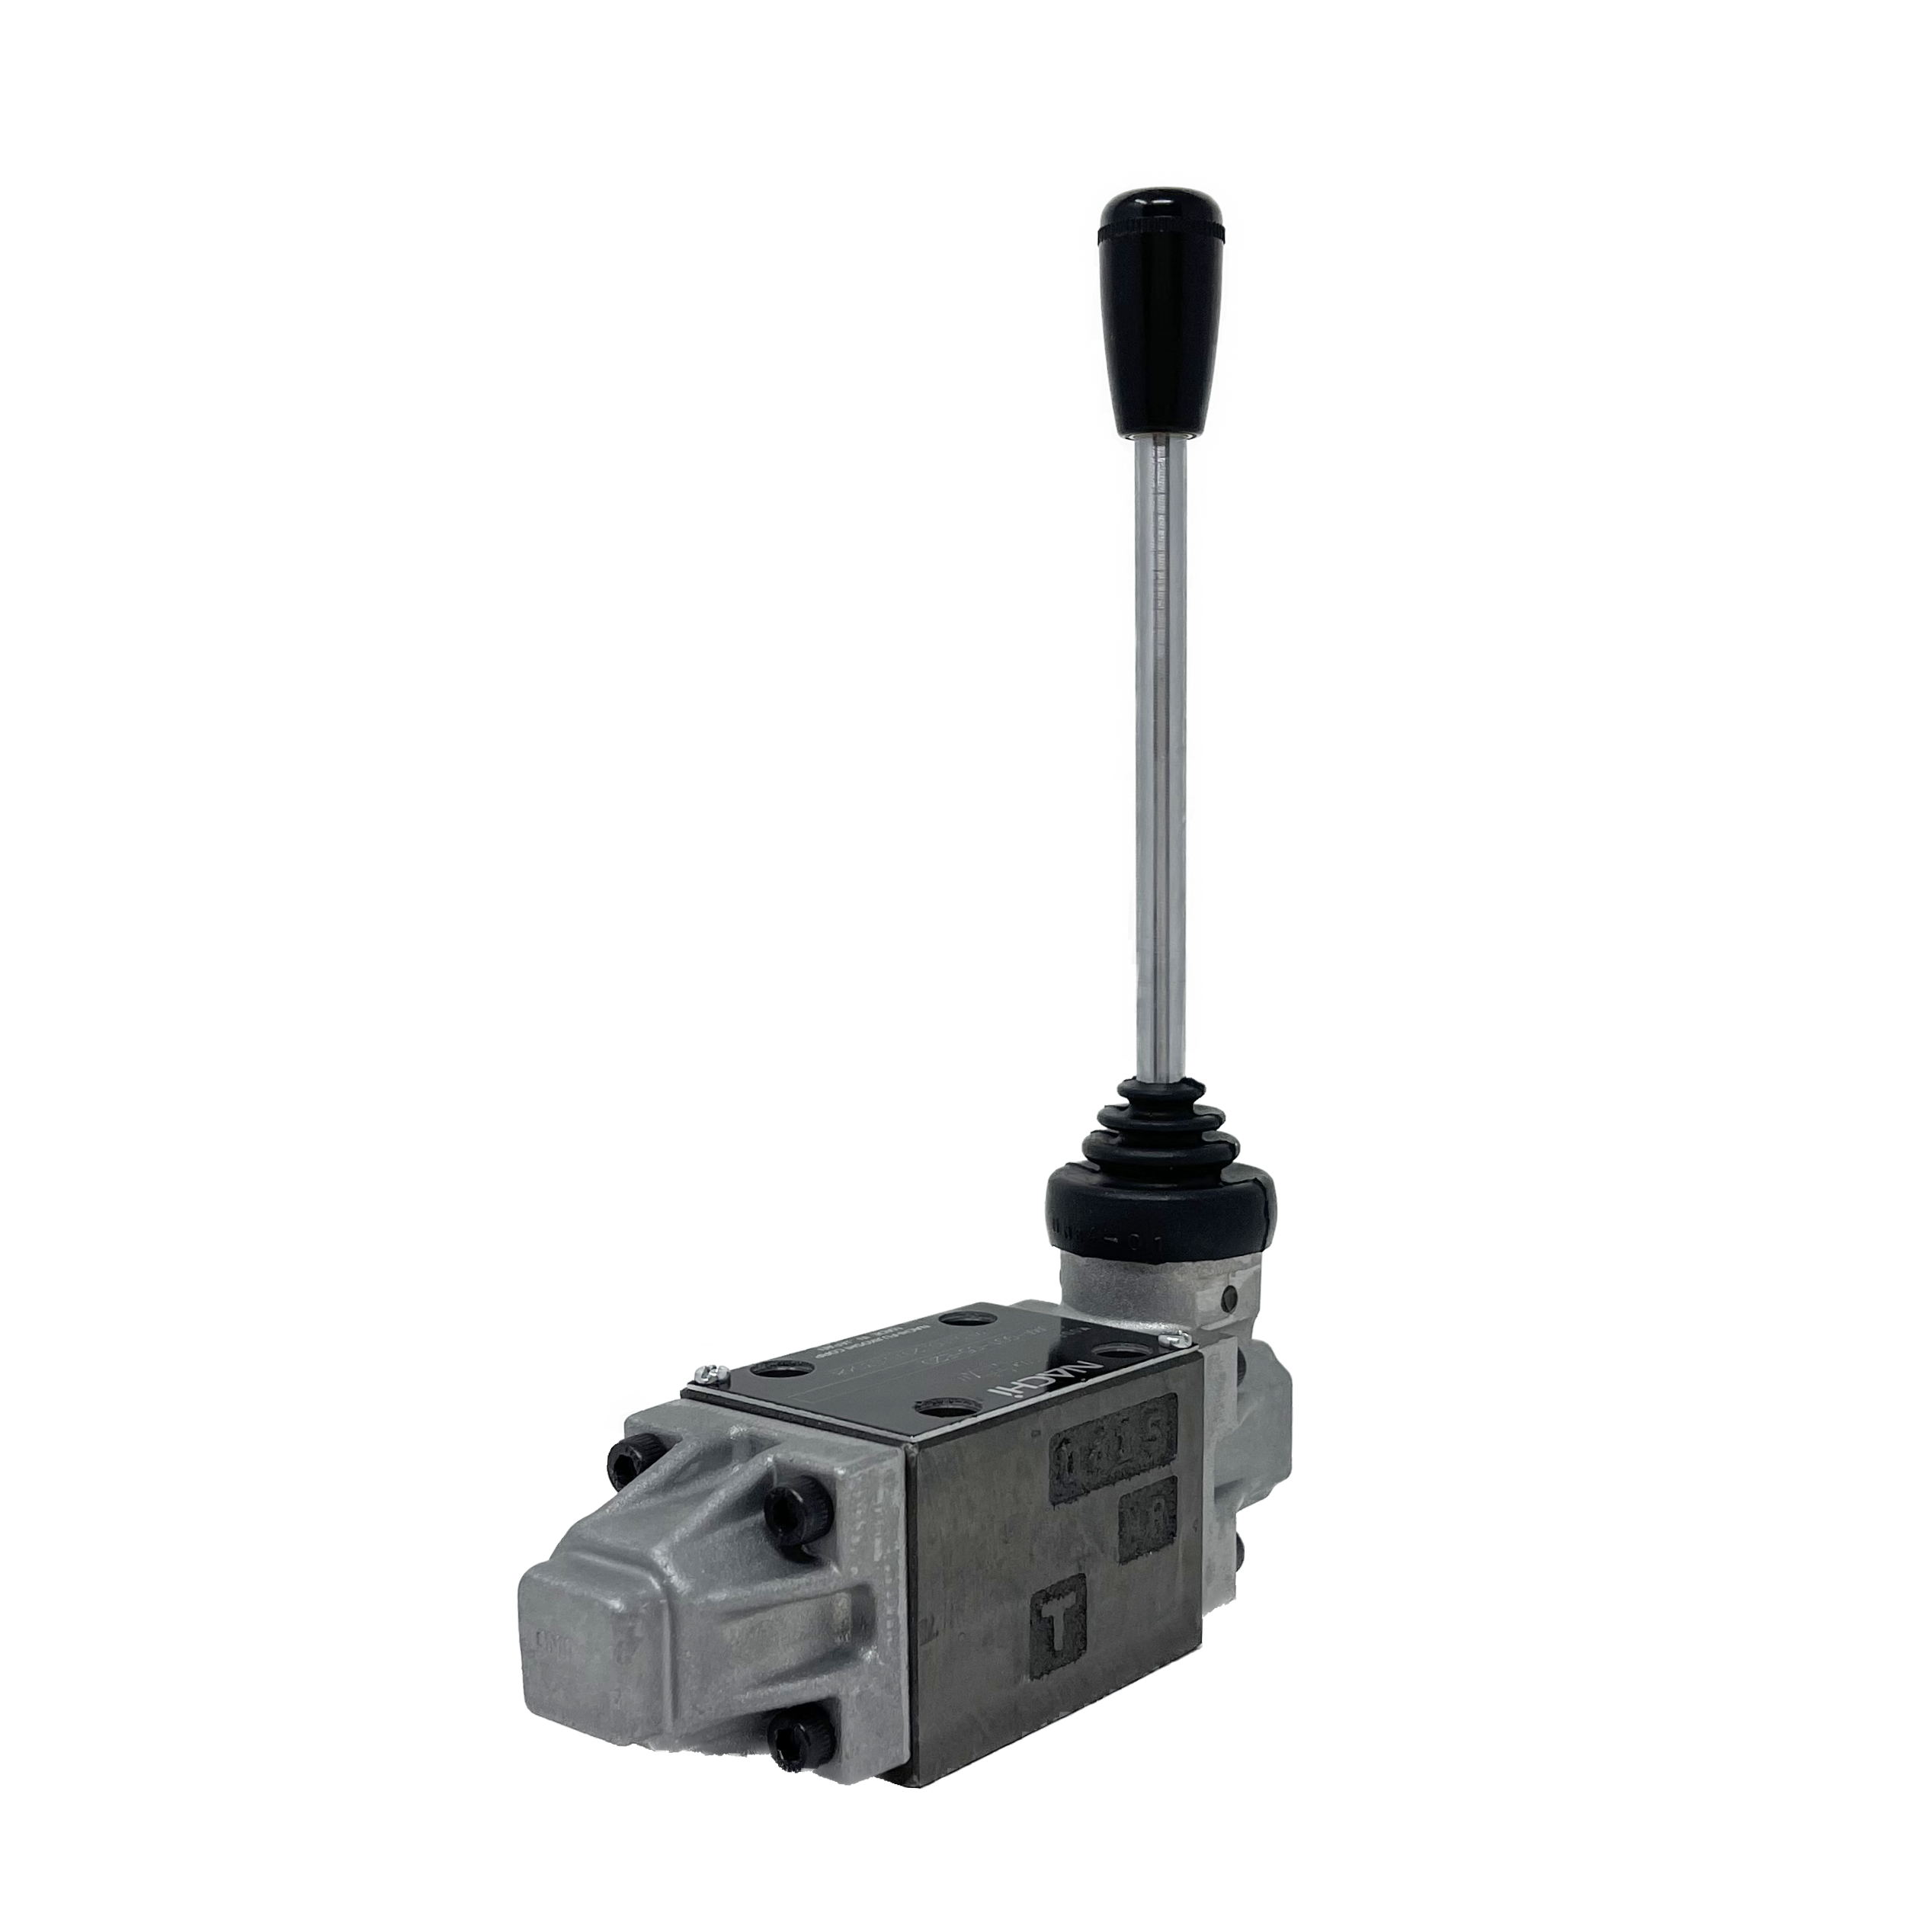 DMA-G01-F4-E20 : Nachi Manual Lever Valve, 4-Way, D03 (NG6), 10.5GPM, 5075psi, All Ports Open Neutral, Detented